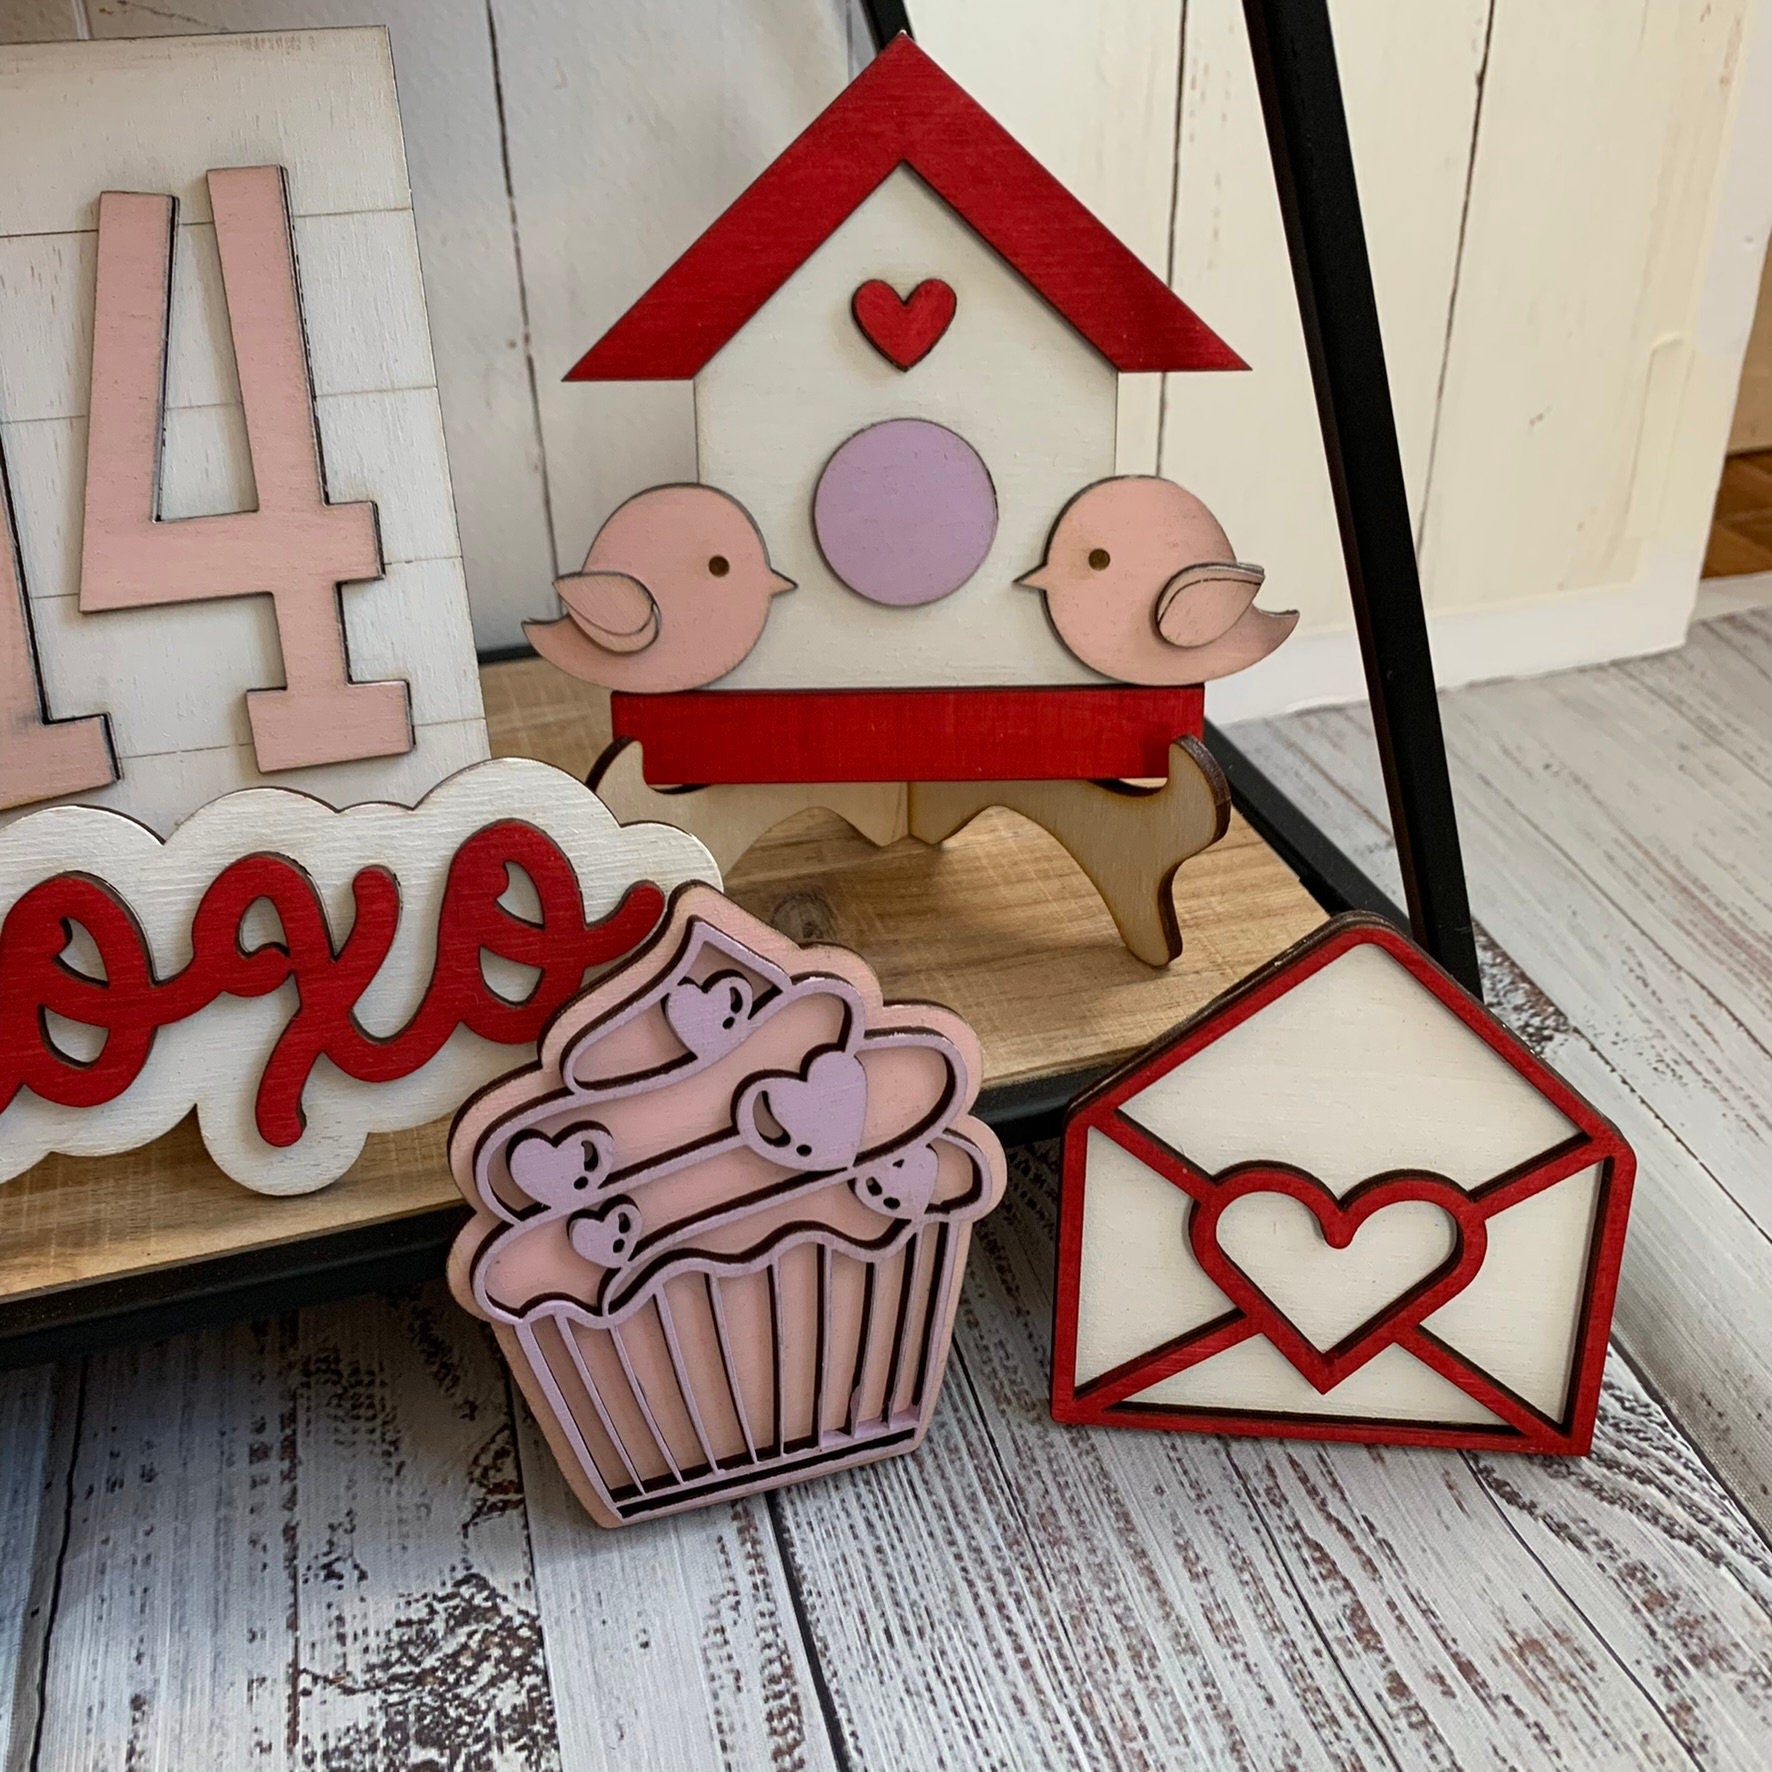 Valentine's Day Tiered Tray Decor - Laser Cut Wood Painted, Love and Kisses Signs, Small Home Decorations for Valentine's Day